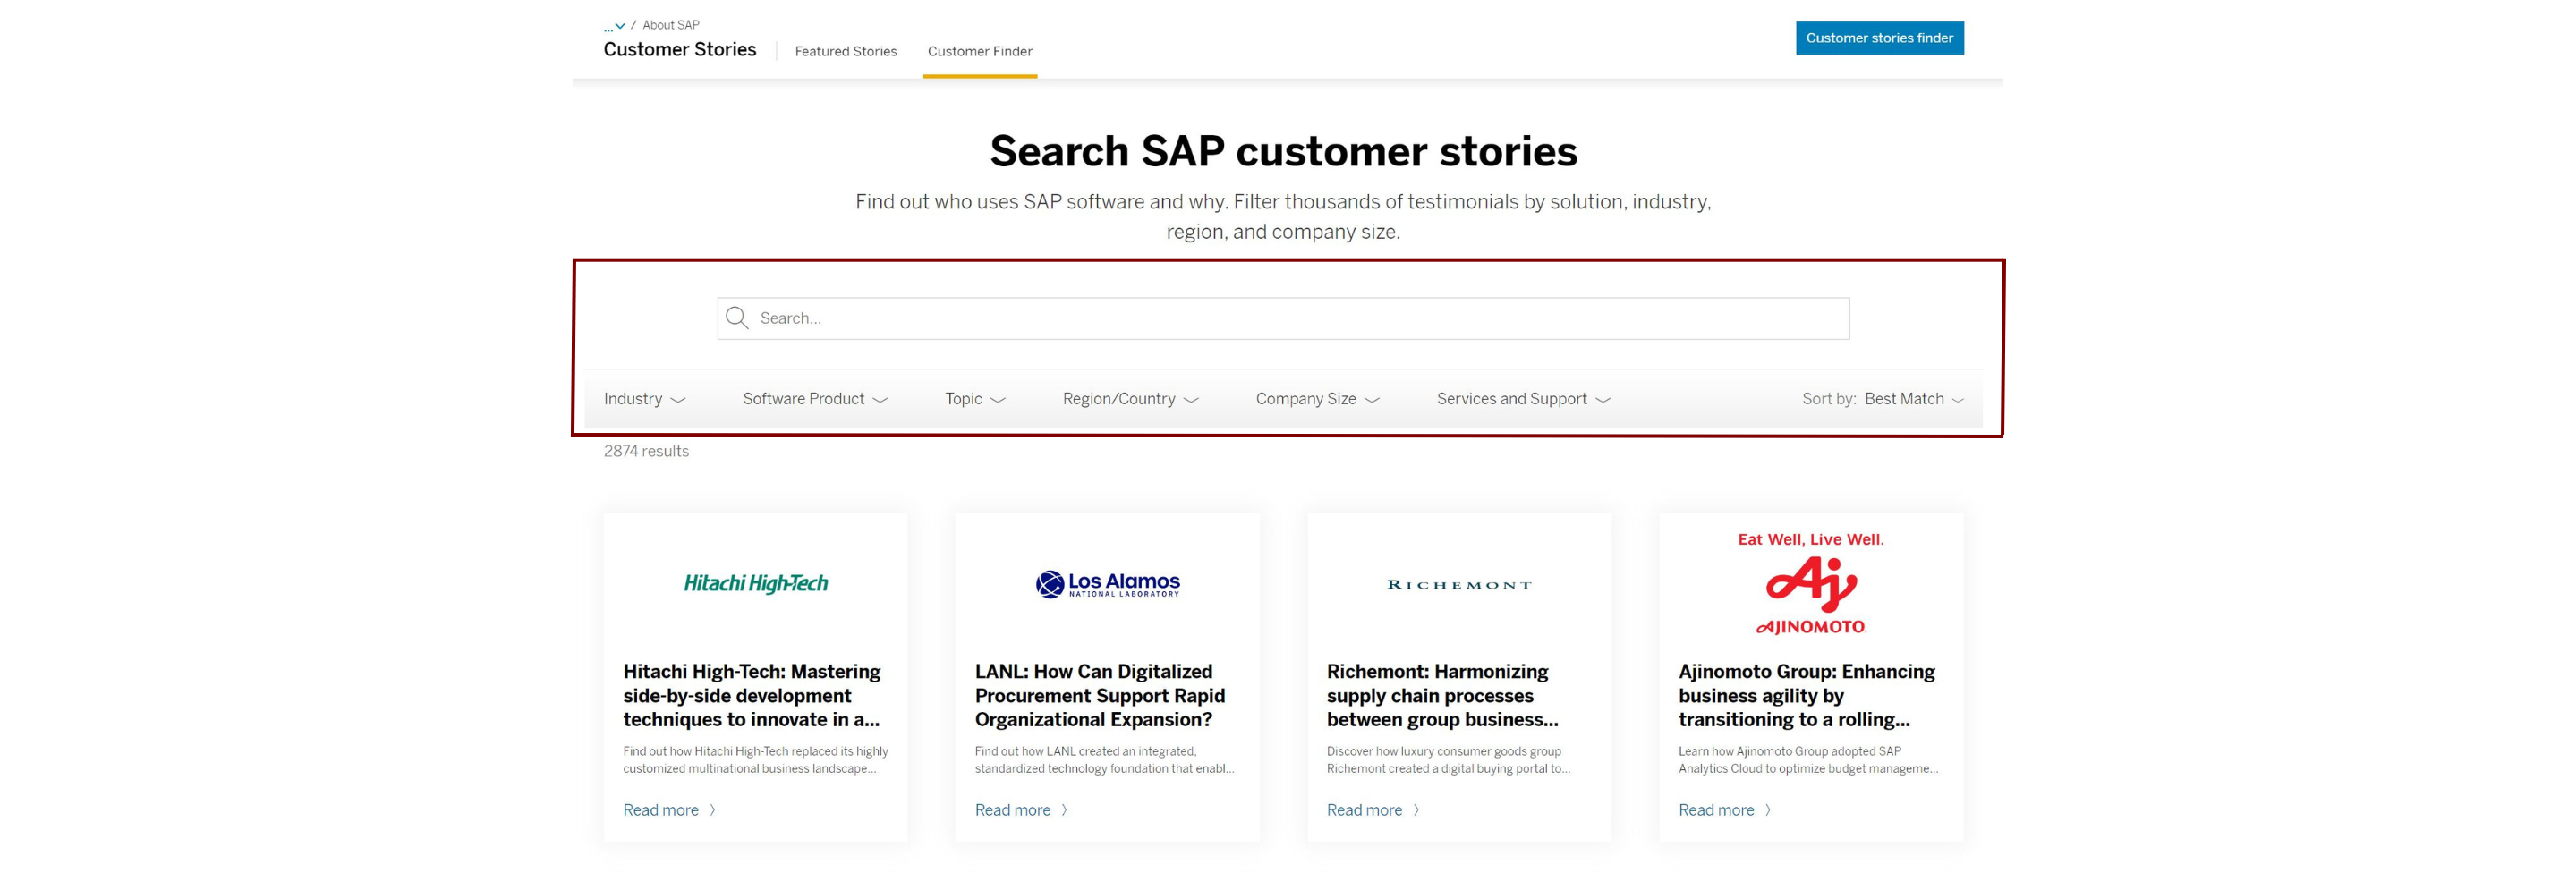 A screen capture for SAP's B2B case studies represents how the company uses filters to help people home in on specific categories.